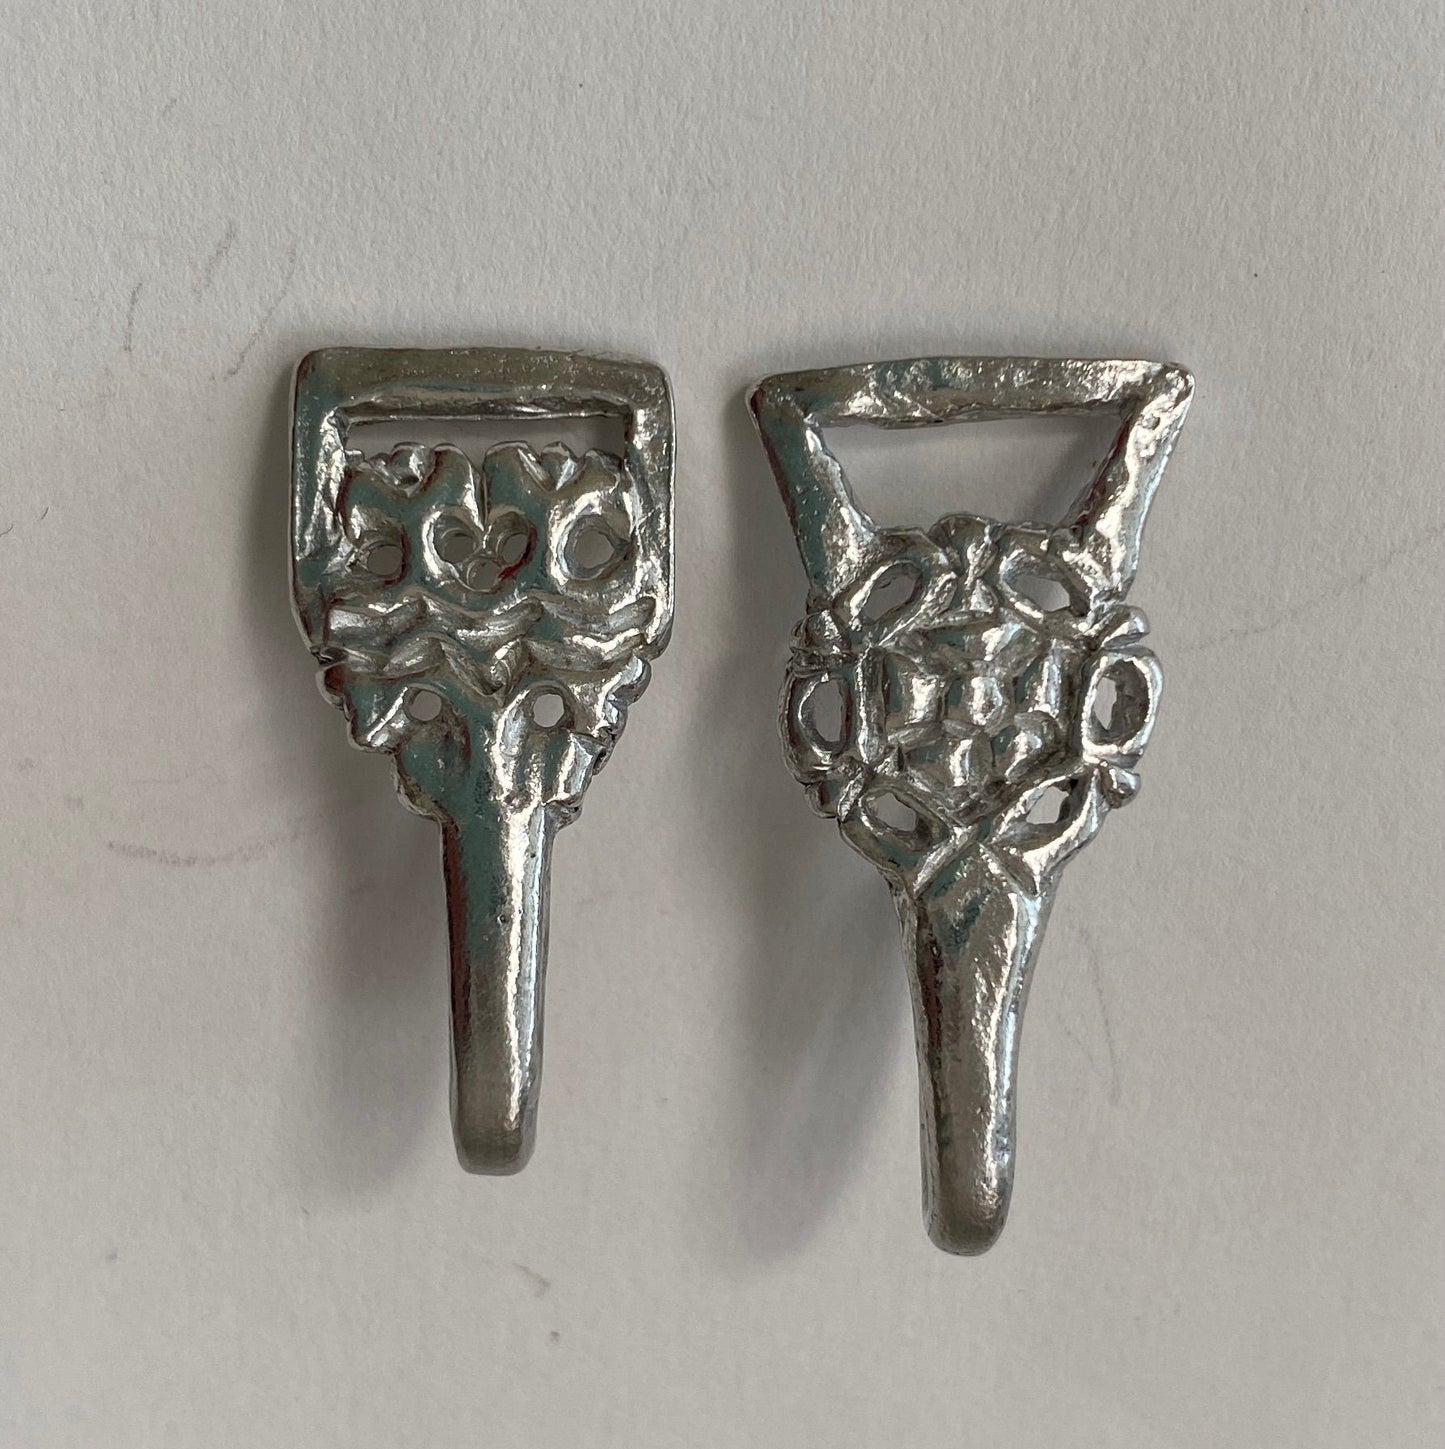 Tudor style pewter hooks (known as dress hooks) sold singly or with ribbon girdle for Renaissance or Elizabethan reenactment or fancy dress